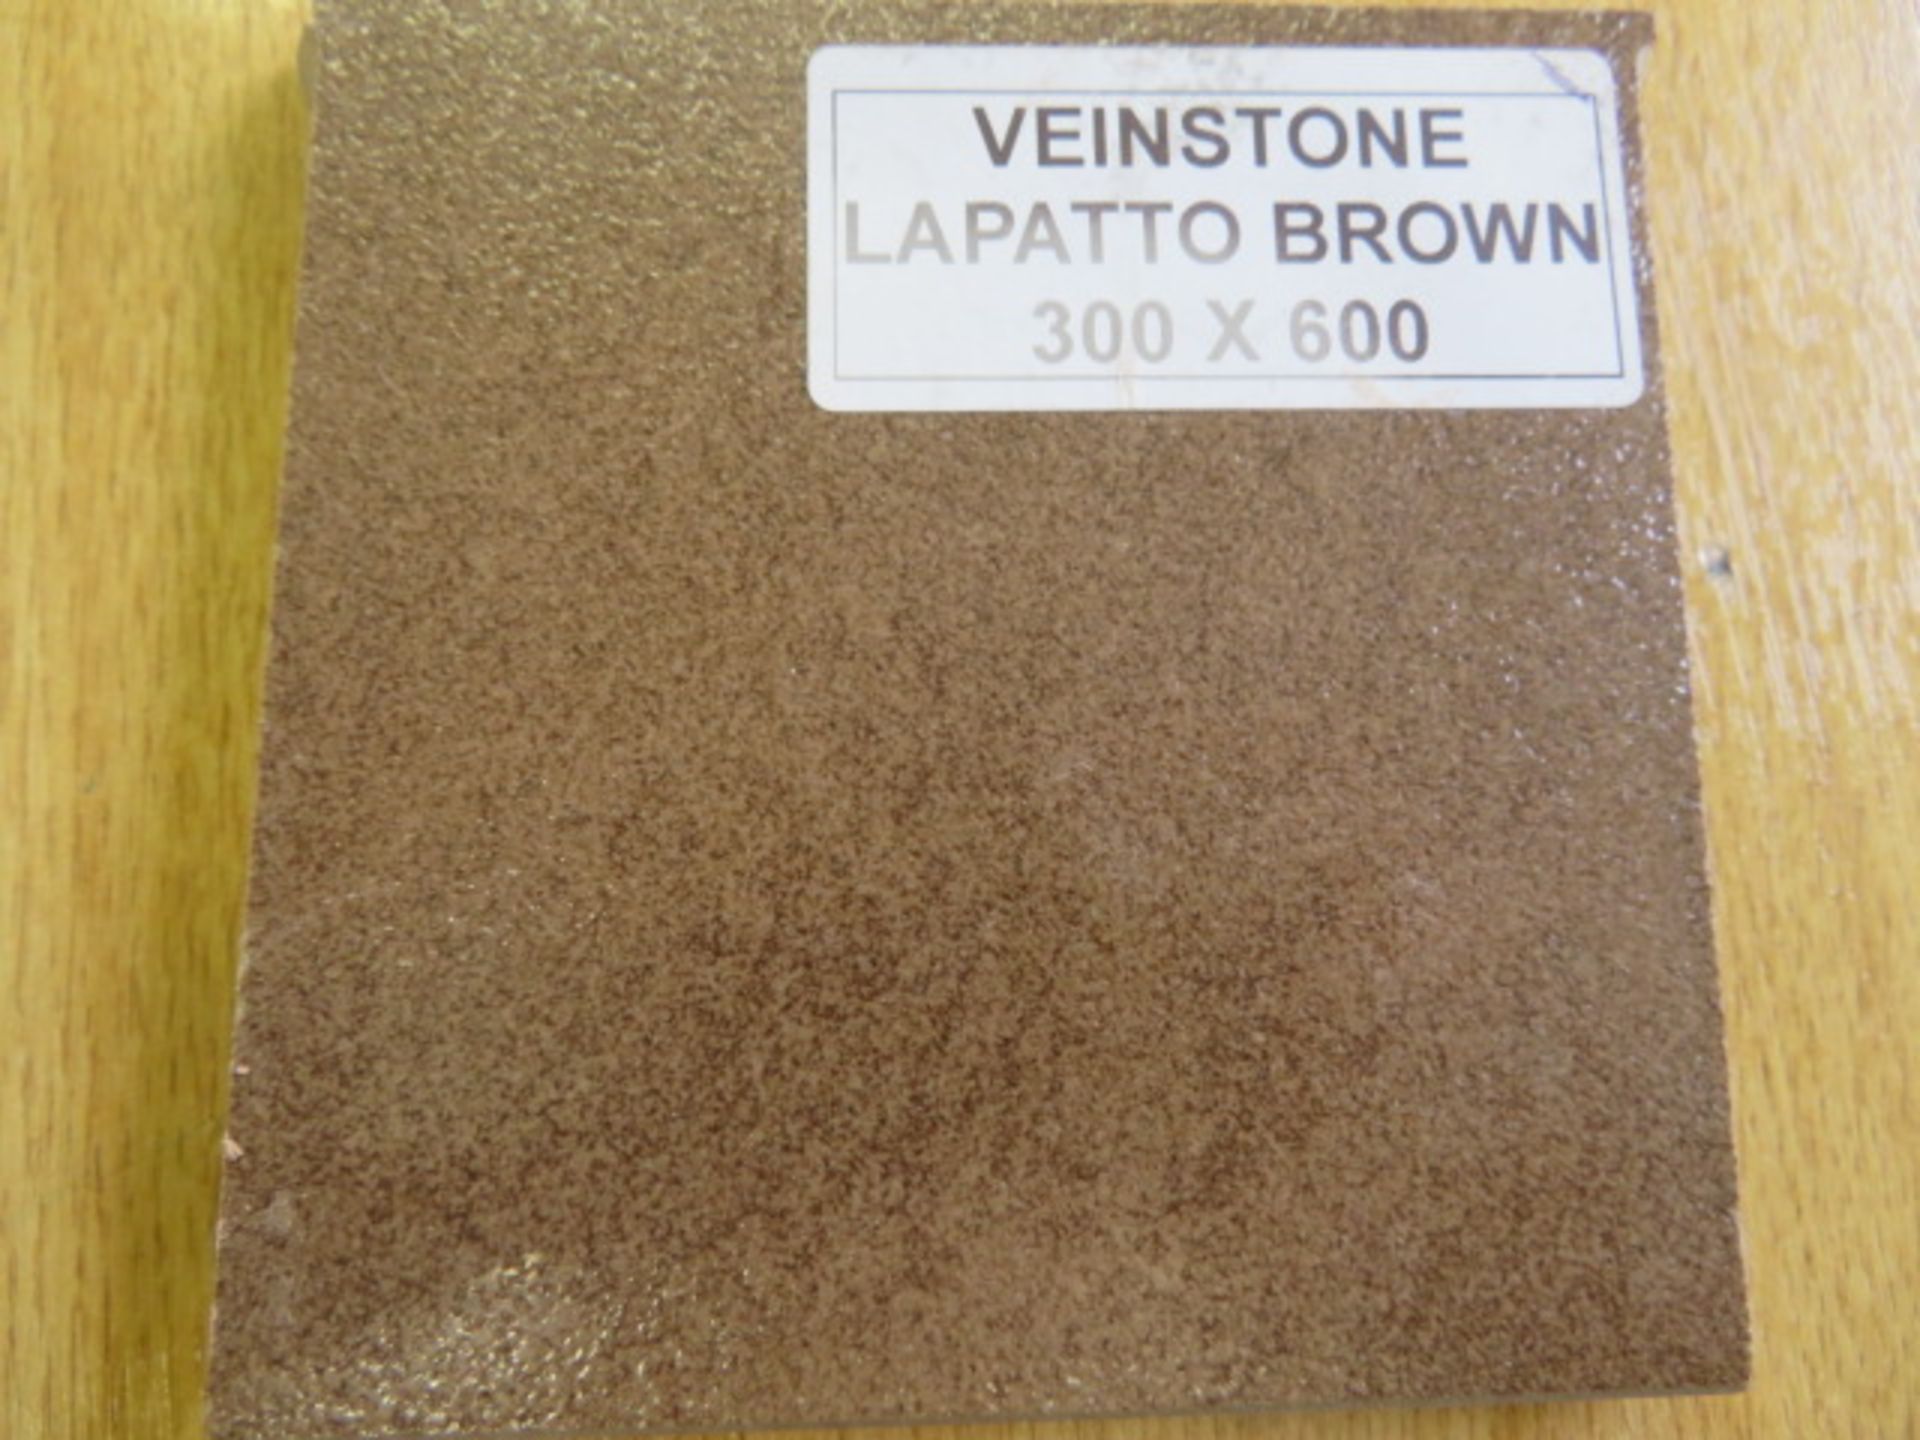 NEW 8.64 Square Meters of Veinstone Lapatto Brown Polished Wall and Floor Tiles. 300x600mm, 1.... - Image 3 of 3